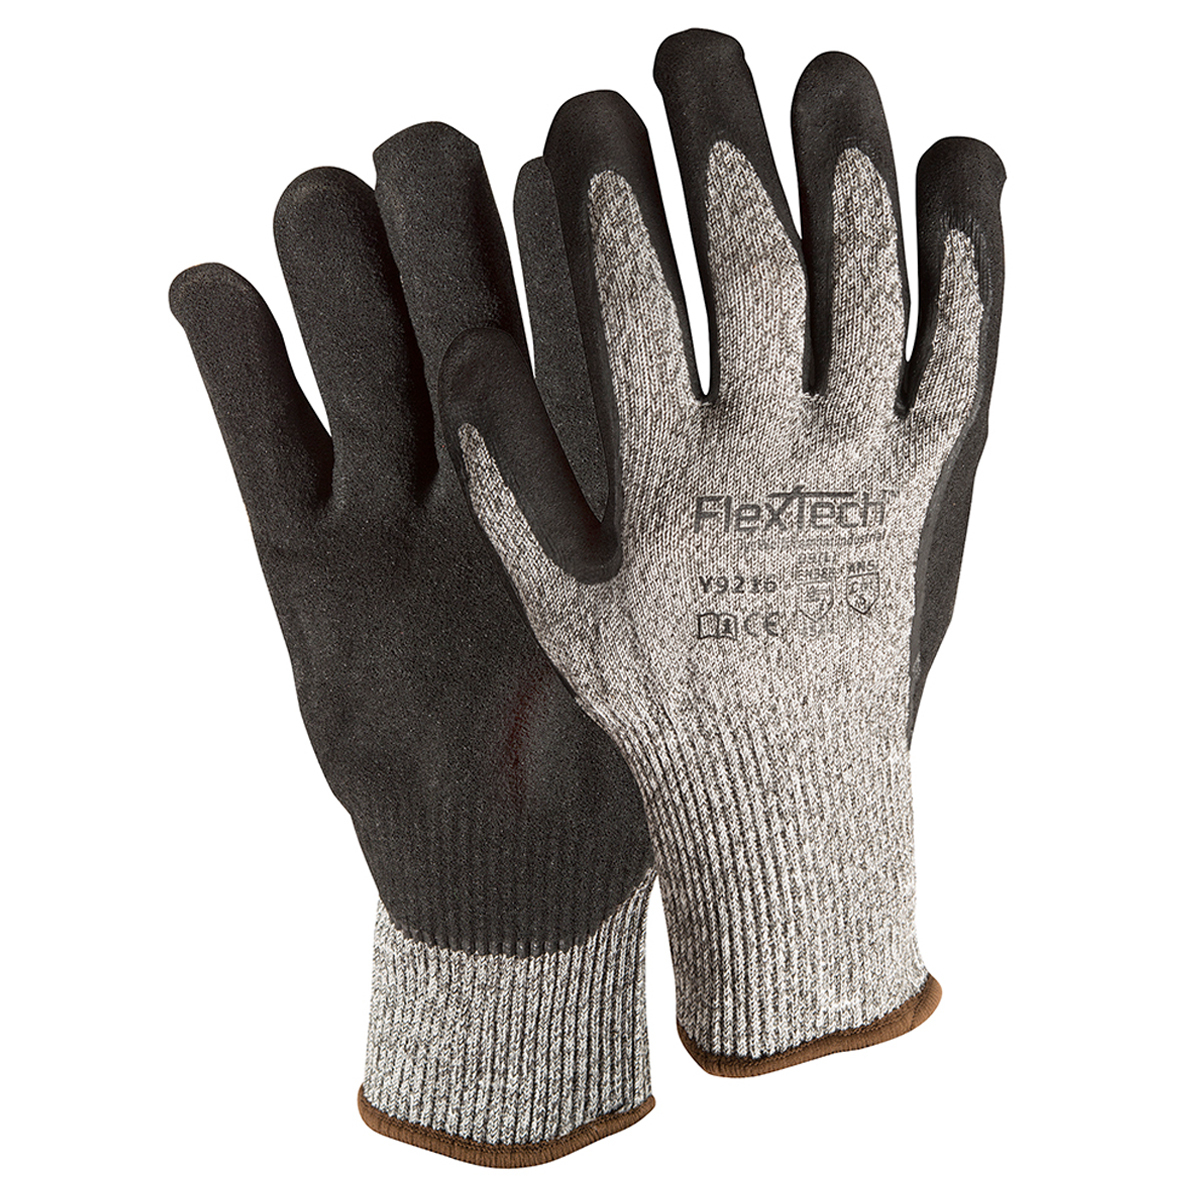 Wells Lamont Medium FlexTech™ 13 Gauge Stainless Steel And Fiber Cut Resistant Gloves With Nitrile Coated Palm And Fingertips